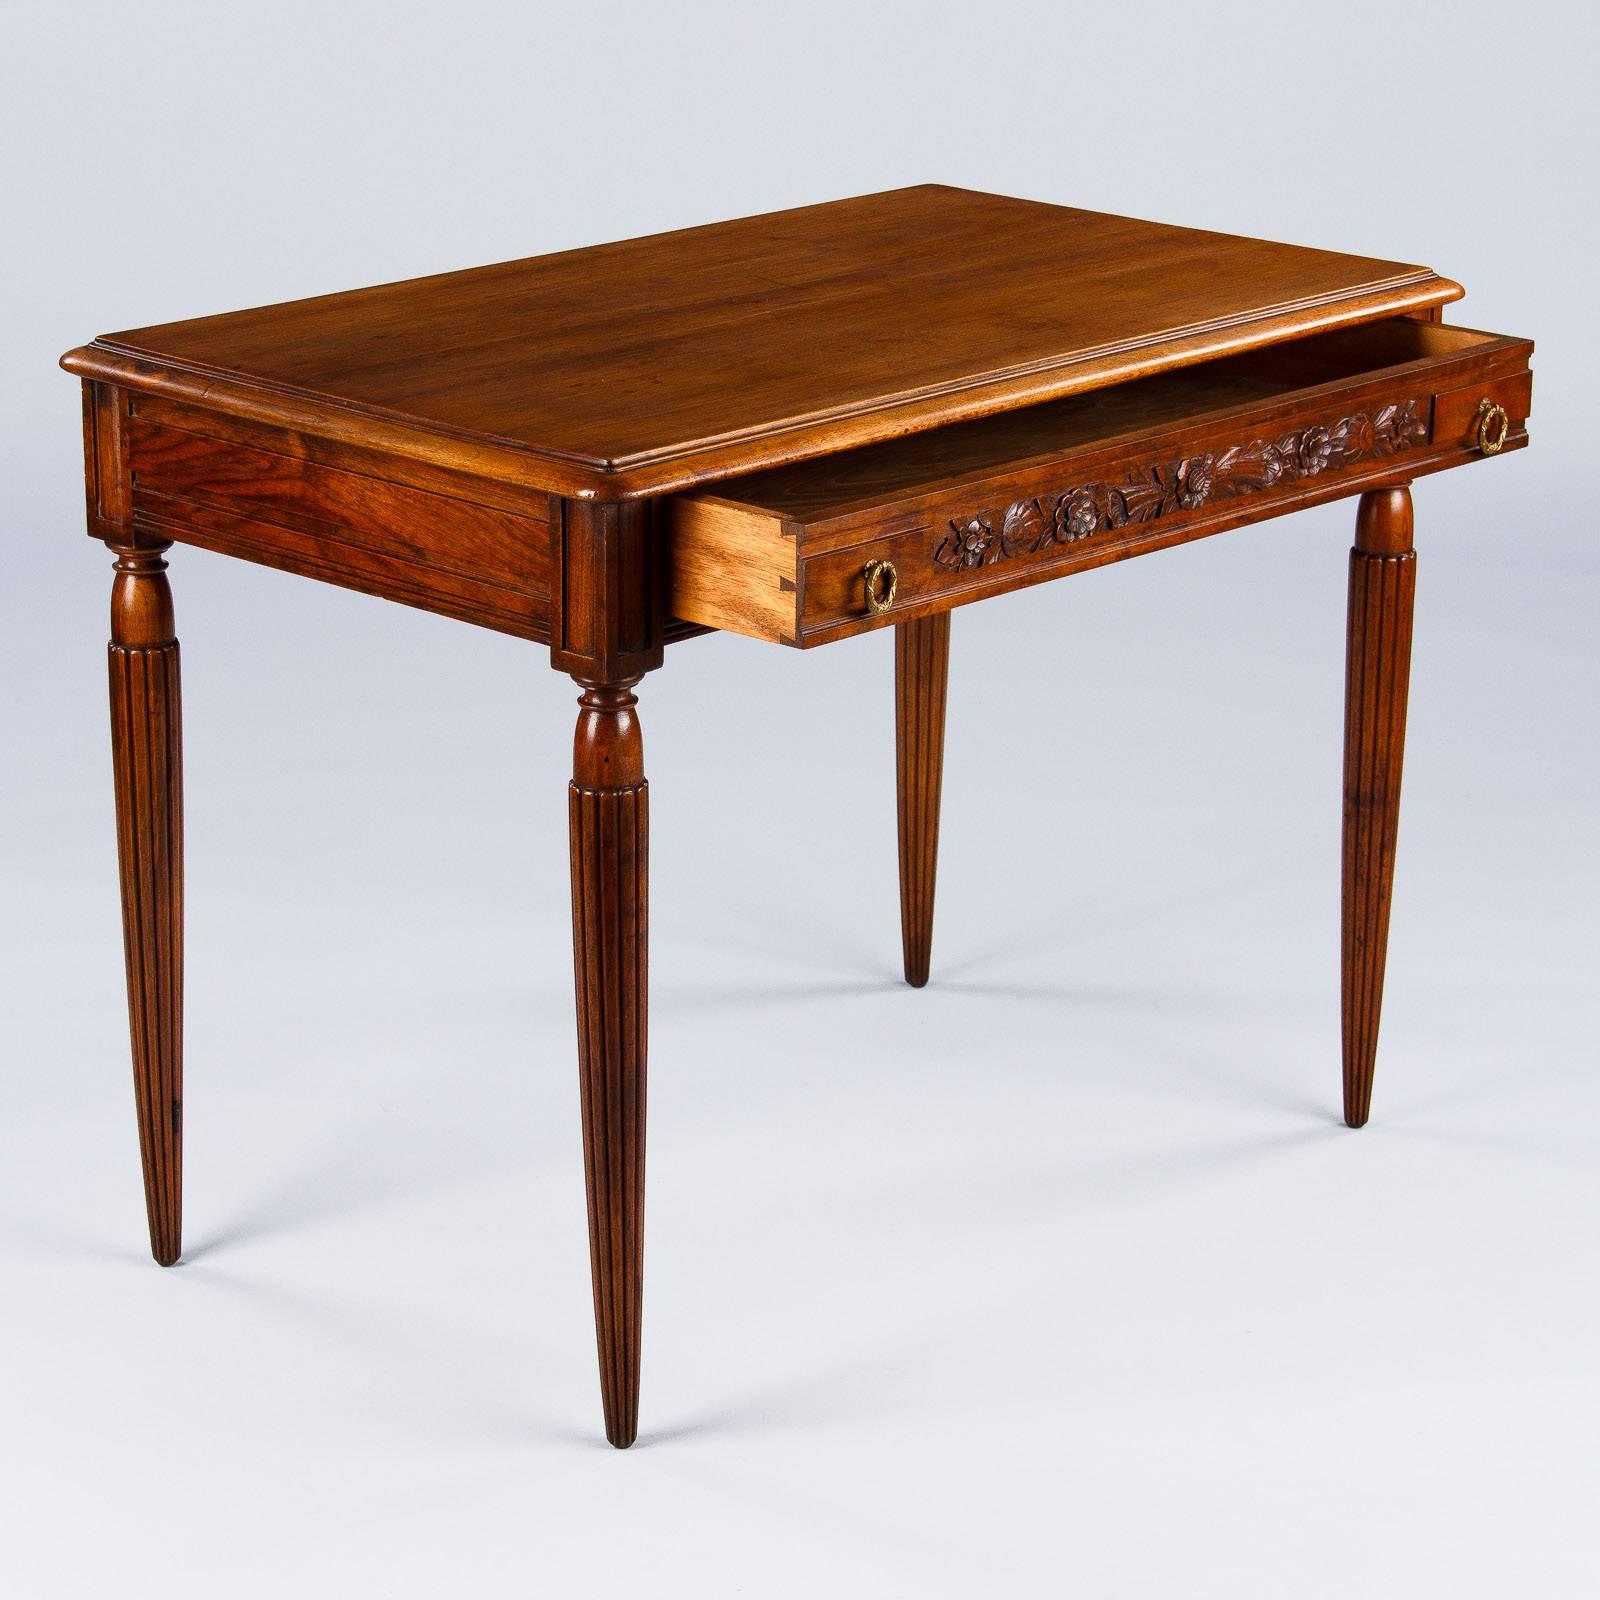 A very elegant desk in the Louis XVI style found in the Loire Region, circa 1900s. The desk is made of walnut and rests on fluted tapered legs. There are carvings of flowers and foliage on the back side and on the single drawer. The drawer features